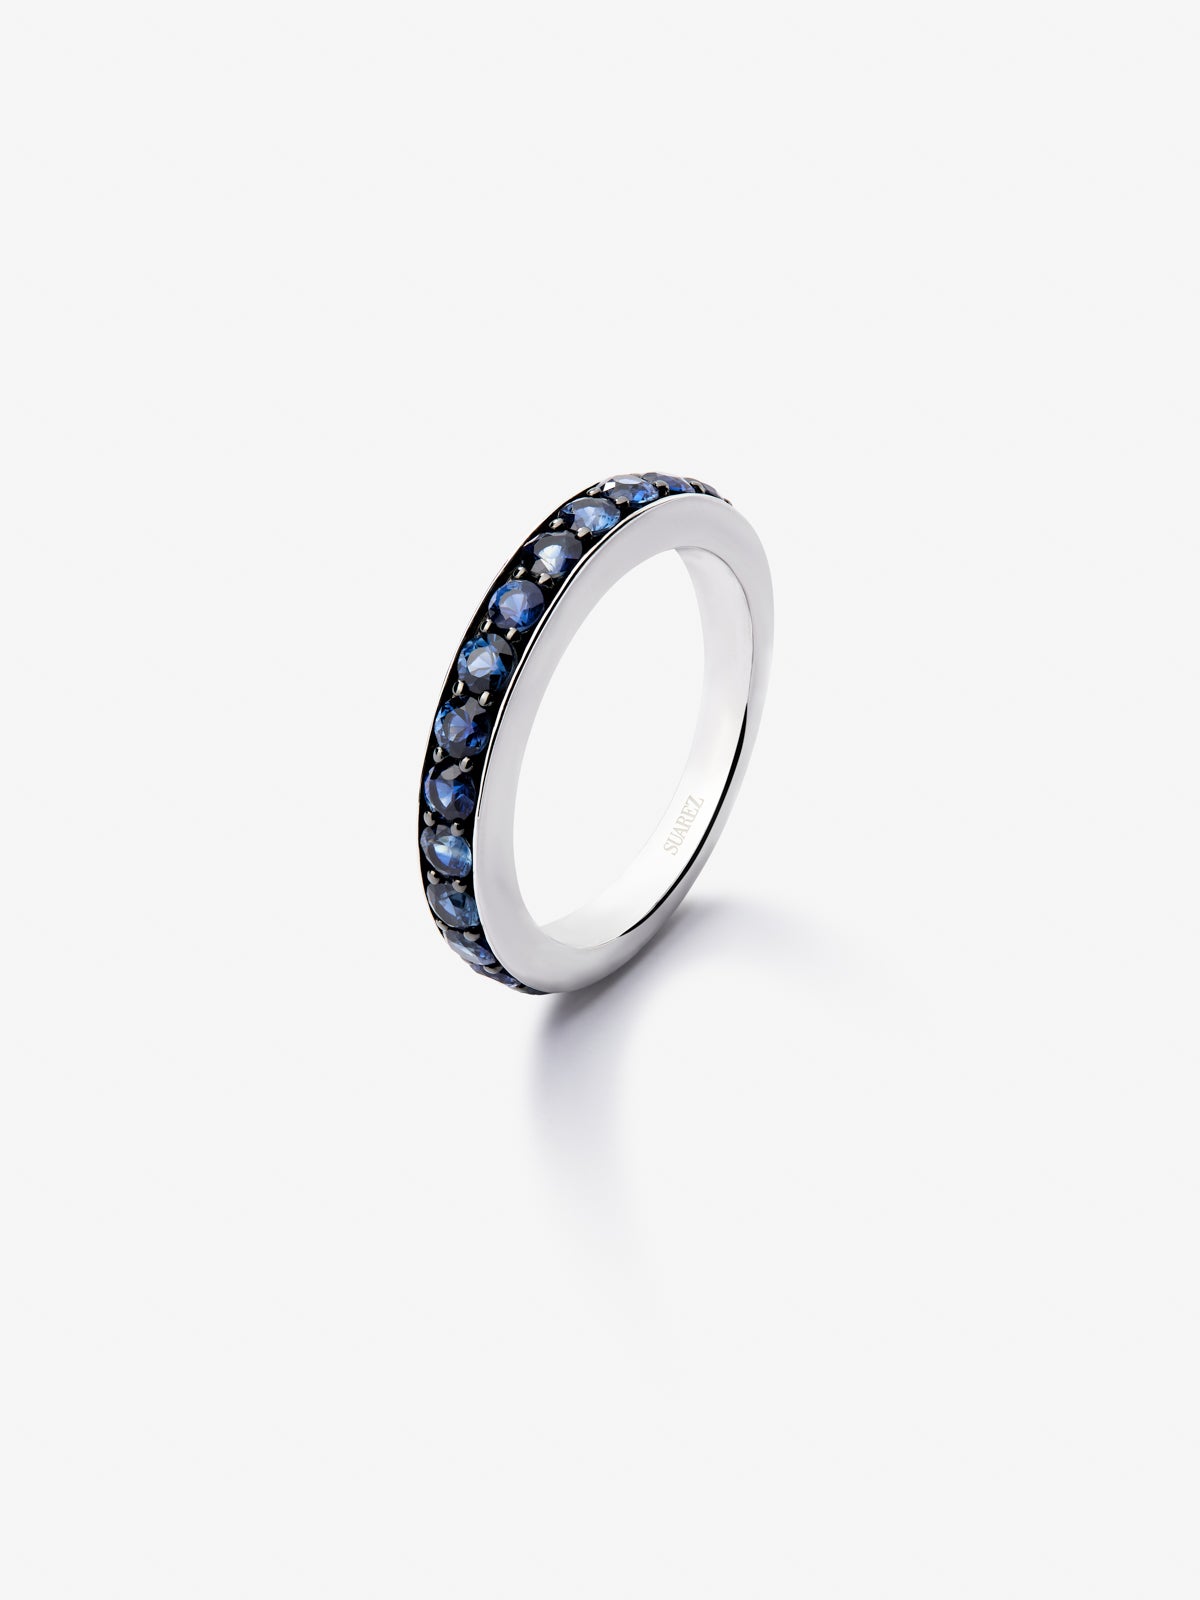 Half 925 silver alliance with 15 brilliant-cut blue sapphires with a total of 1.26 cts